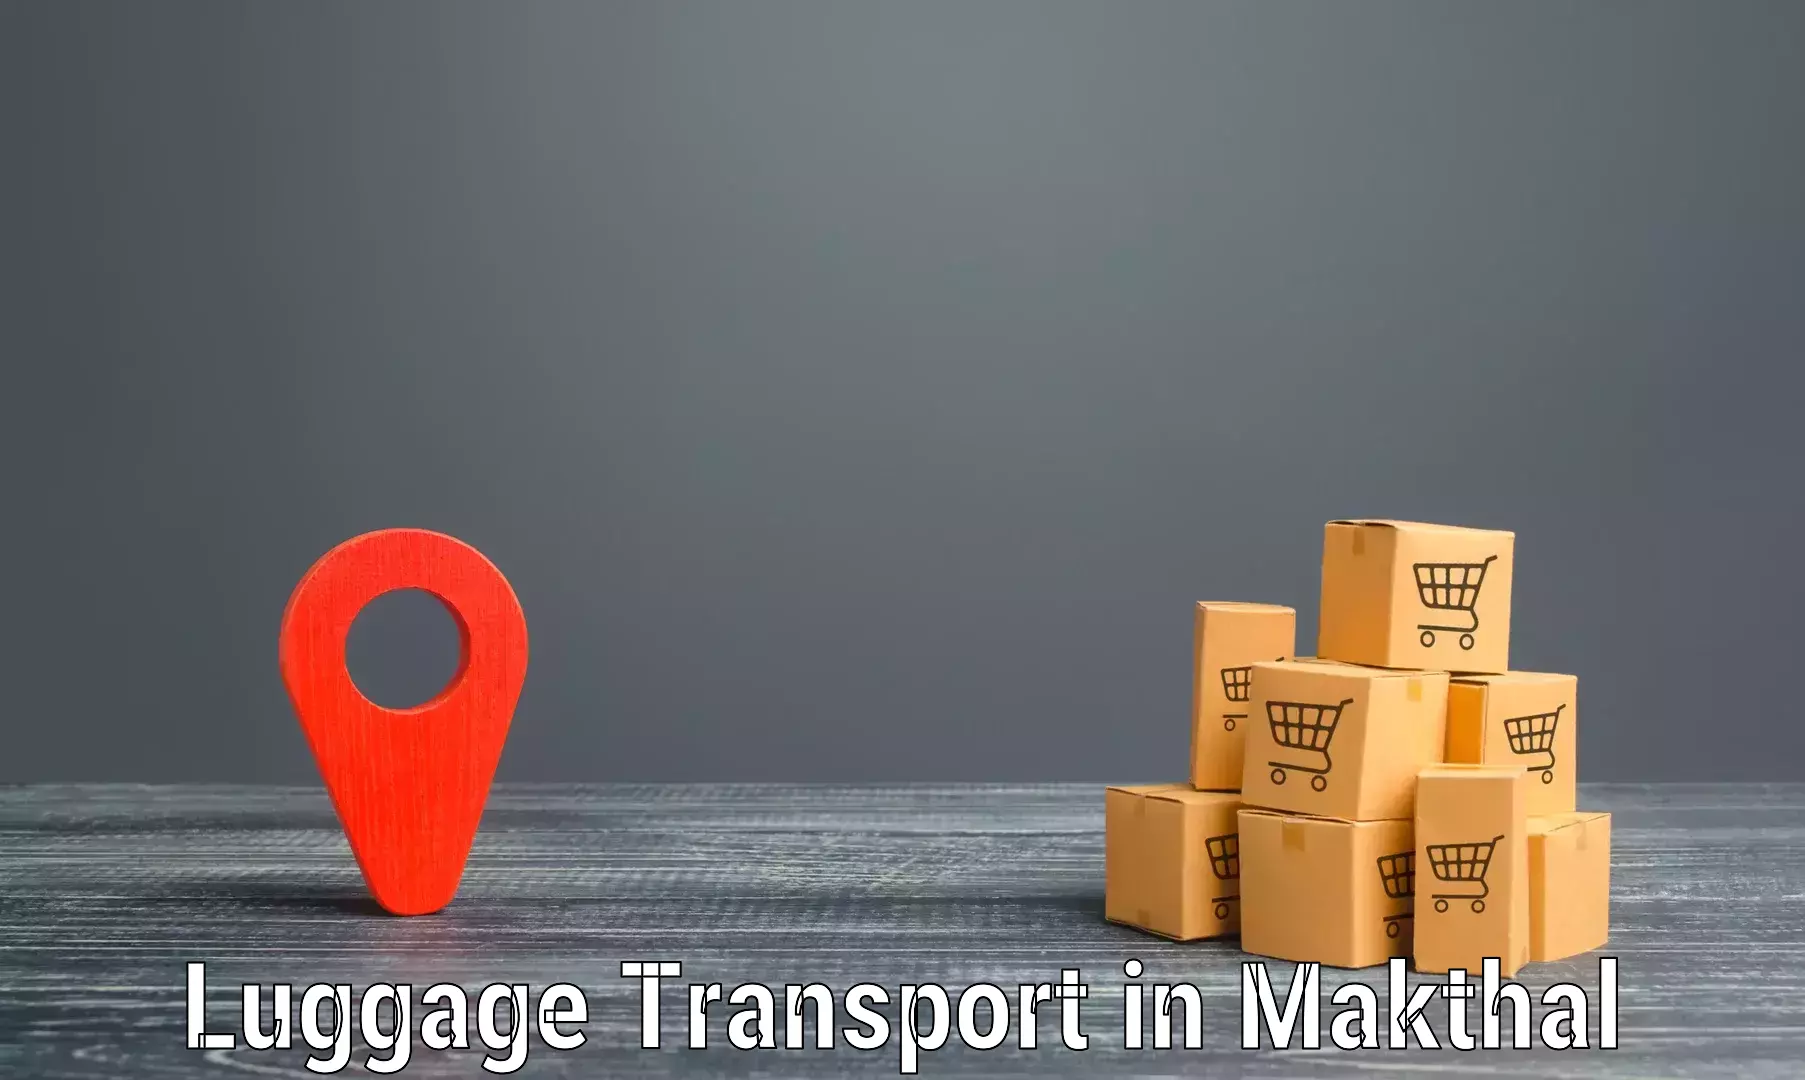 Business luggage transport in Makthal